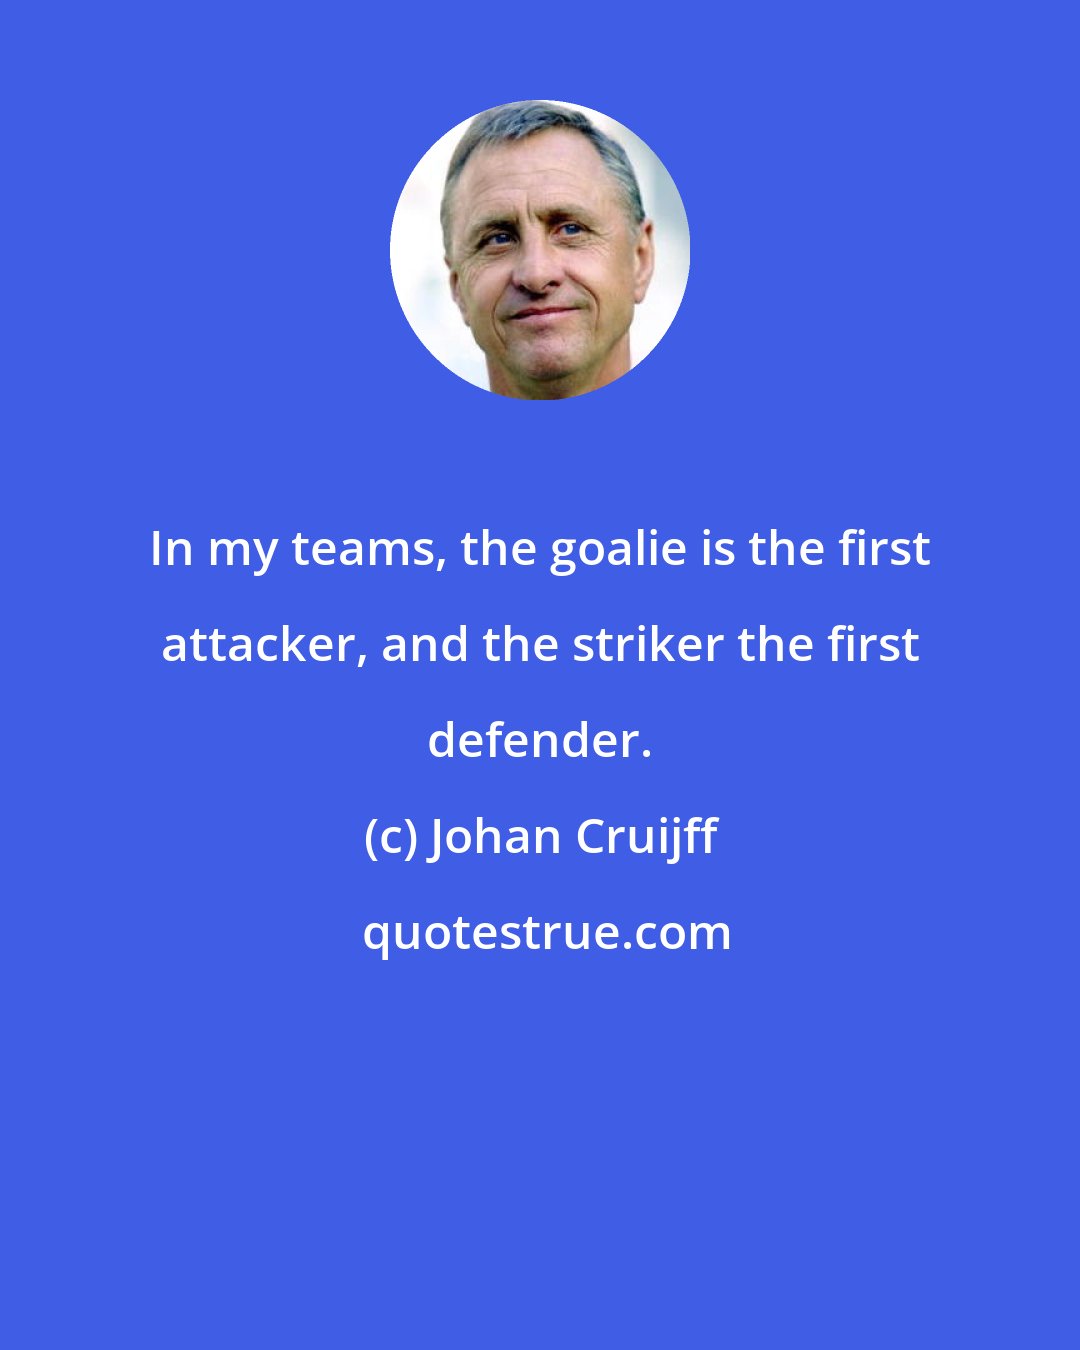 Johan Cruijff: In my teams, the goalie is the first attacker, and the striker the first defender.